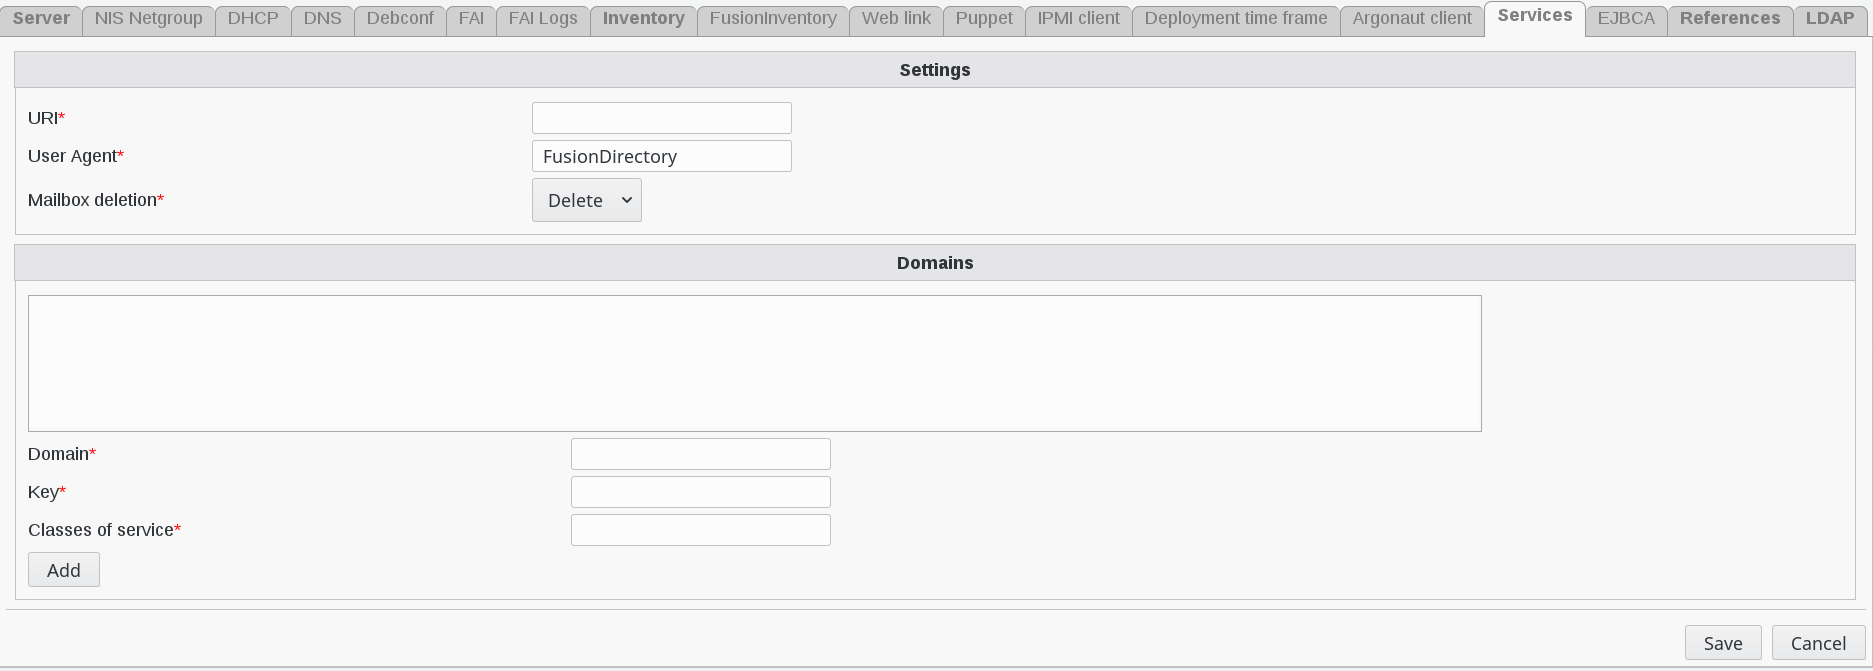 Picture of Renaterpartage settings page in FusionDirectory